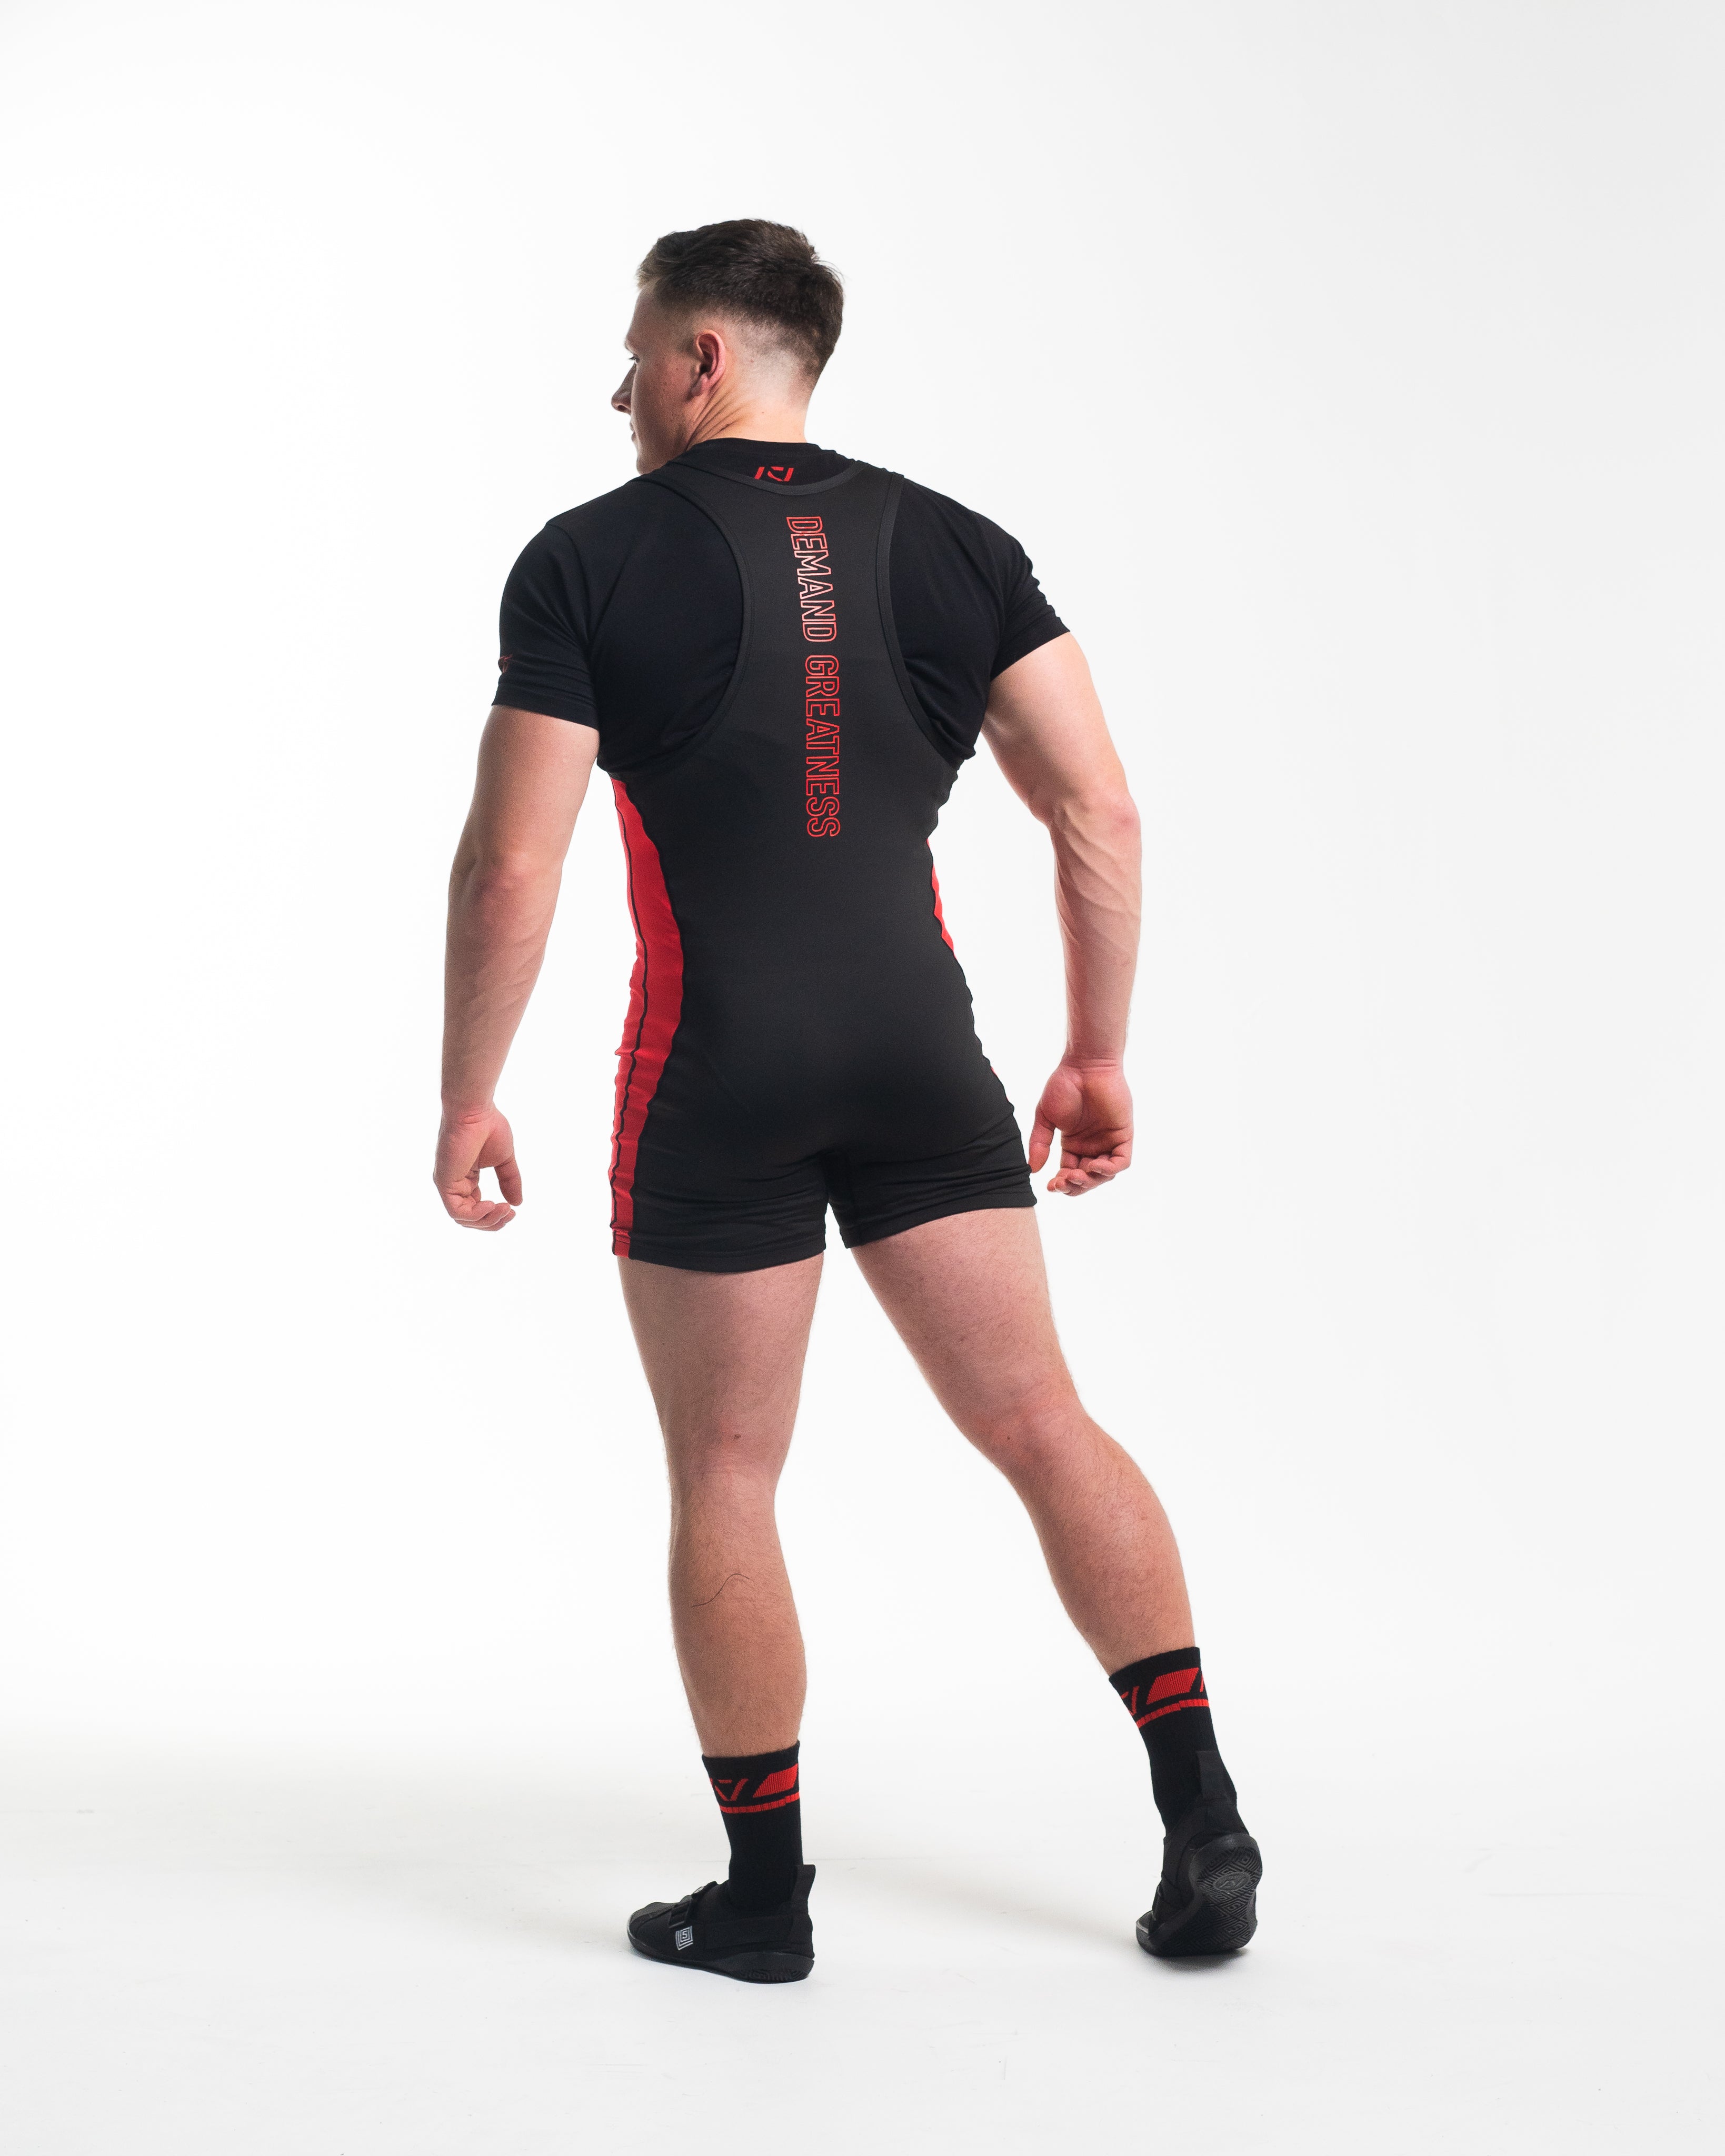 A7 Red Dawn Crew socks showcase dark grey logos to keep contrast at a minimum and let your energy show on the platform, in your training or while out and about. The IPF Approved Shadow Stone Meet Kit includes Powerlifting Singlet, A7 Meet Shirt, A7 Zebra Wrist Wraps, A7 Deadlift Socks, Hourglass Knee Sleeves (Stiff Knee Sleeves and Rigor Mortis Knee Sleeves). All A7 Powerlifting Equipment shipping to UK, Norway, Switzerland and Iceland.